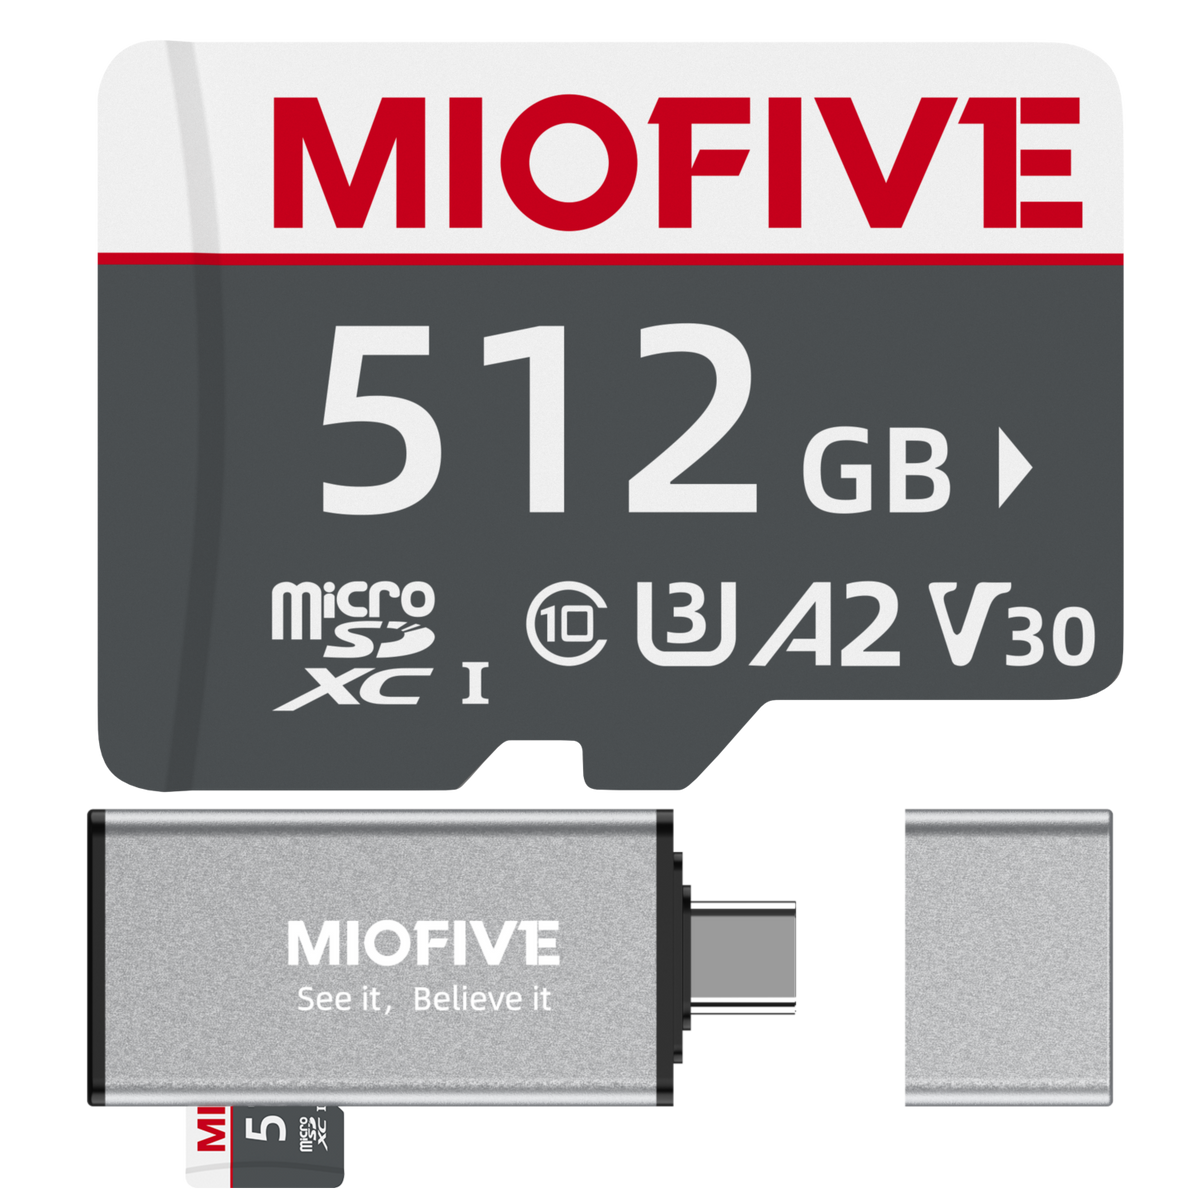 Miofive 512GB microSDXC Memory Card - Ultimate Micro SD Card with USB 3.0 Type-C Card Reader 170MB/s, C10, U3, A2, V30, 4K for Dash Cams, Android Smartphones, Tablets, and Gaming devices